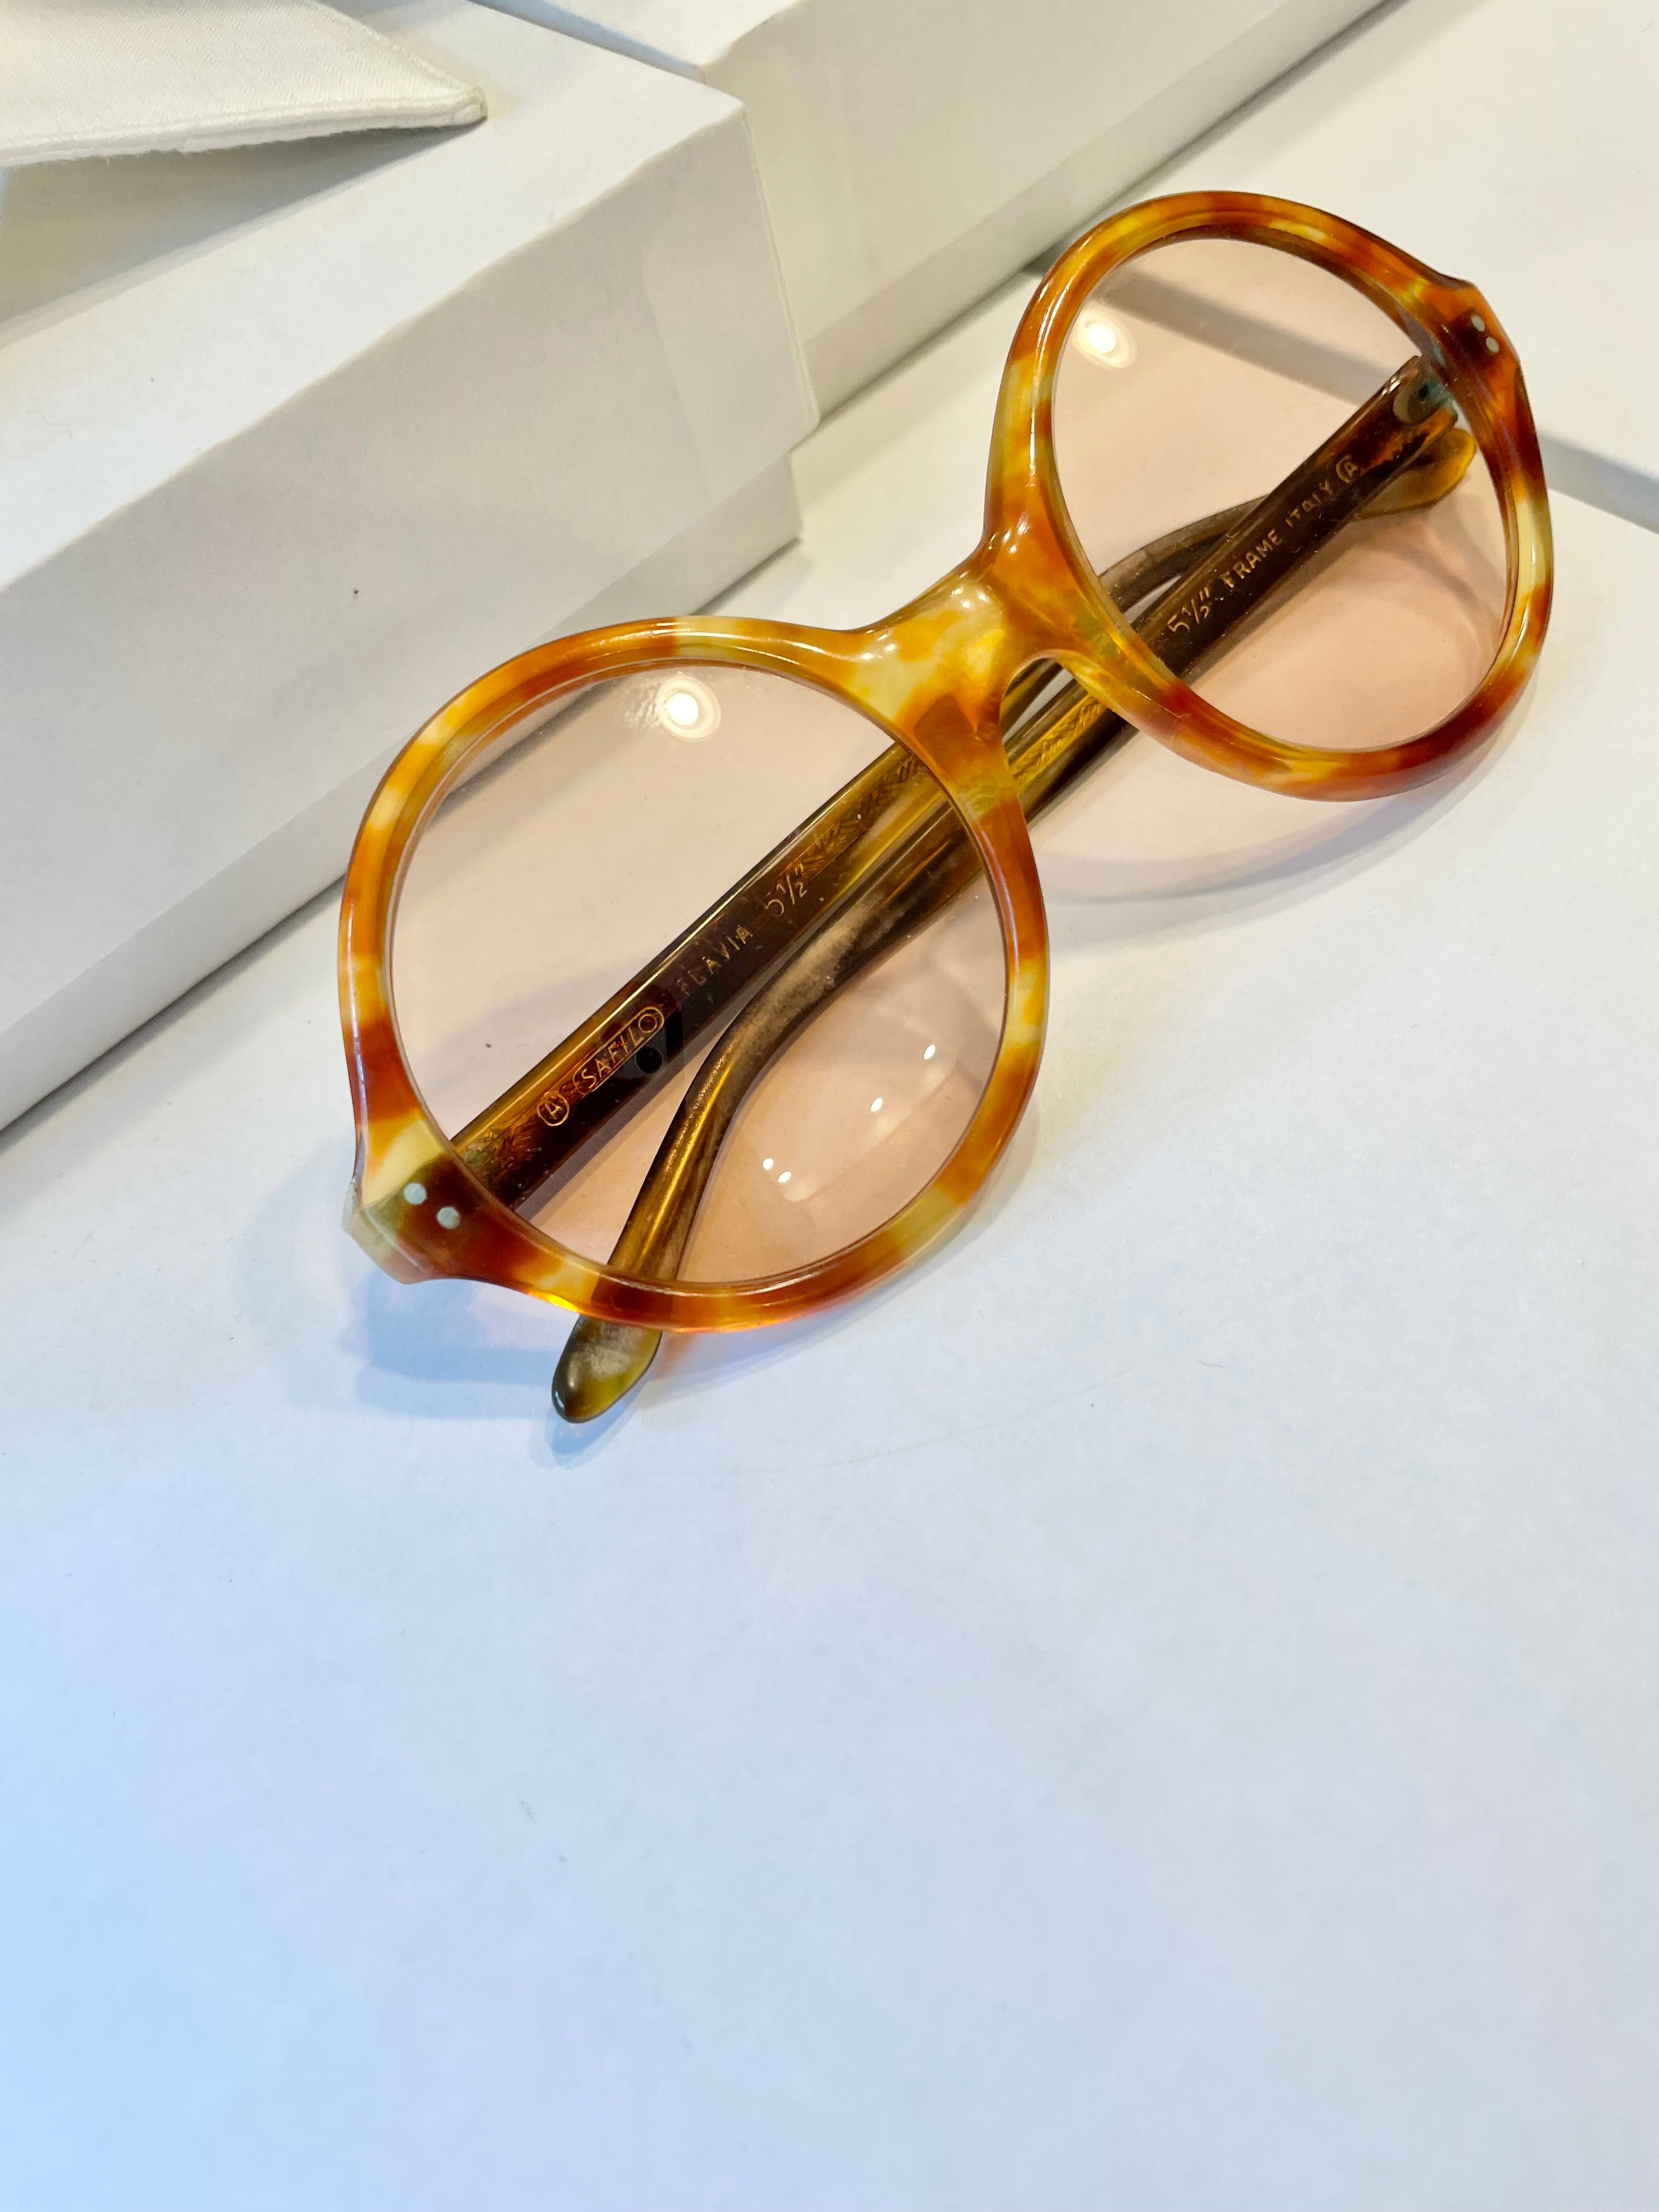 The Preppy Girl Society loves a classy pair of sunnies... These tortoise round sunglasses are a 1950's gem! Made in France